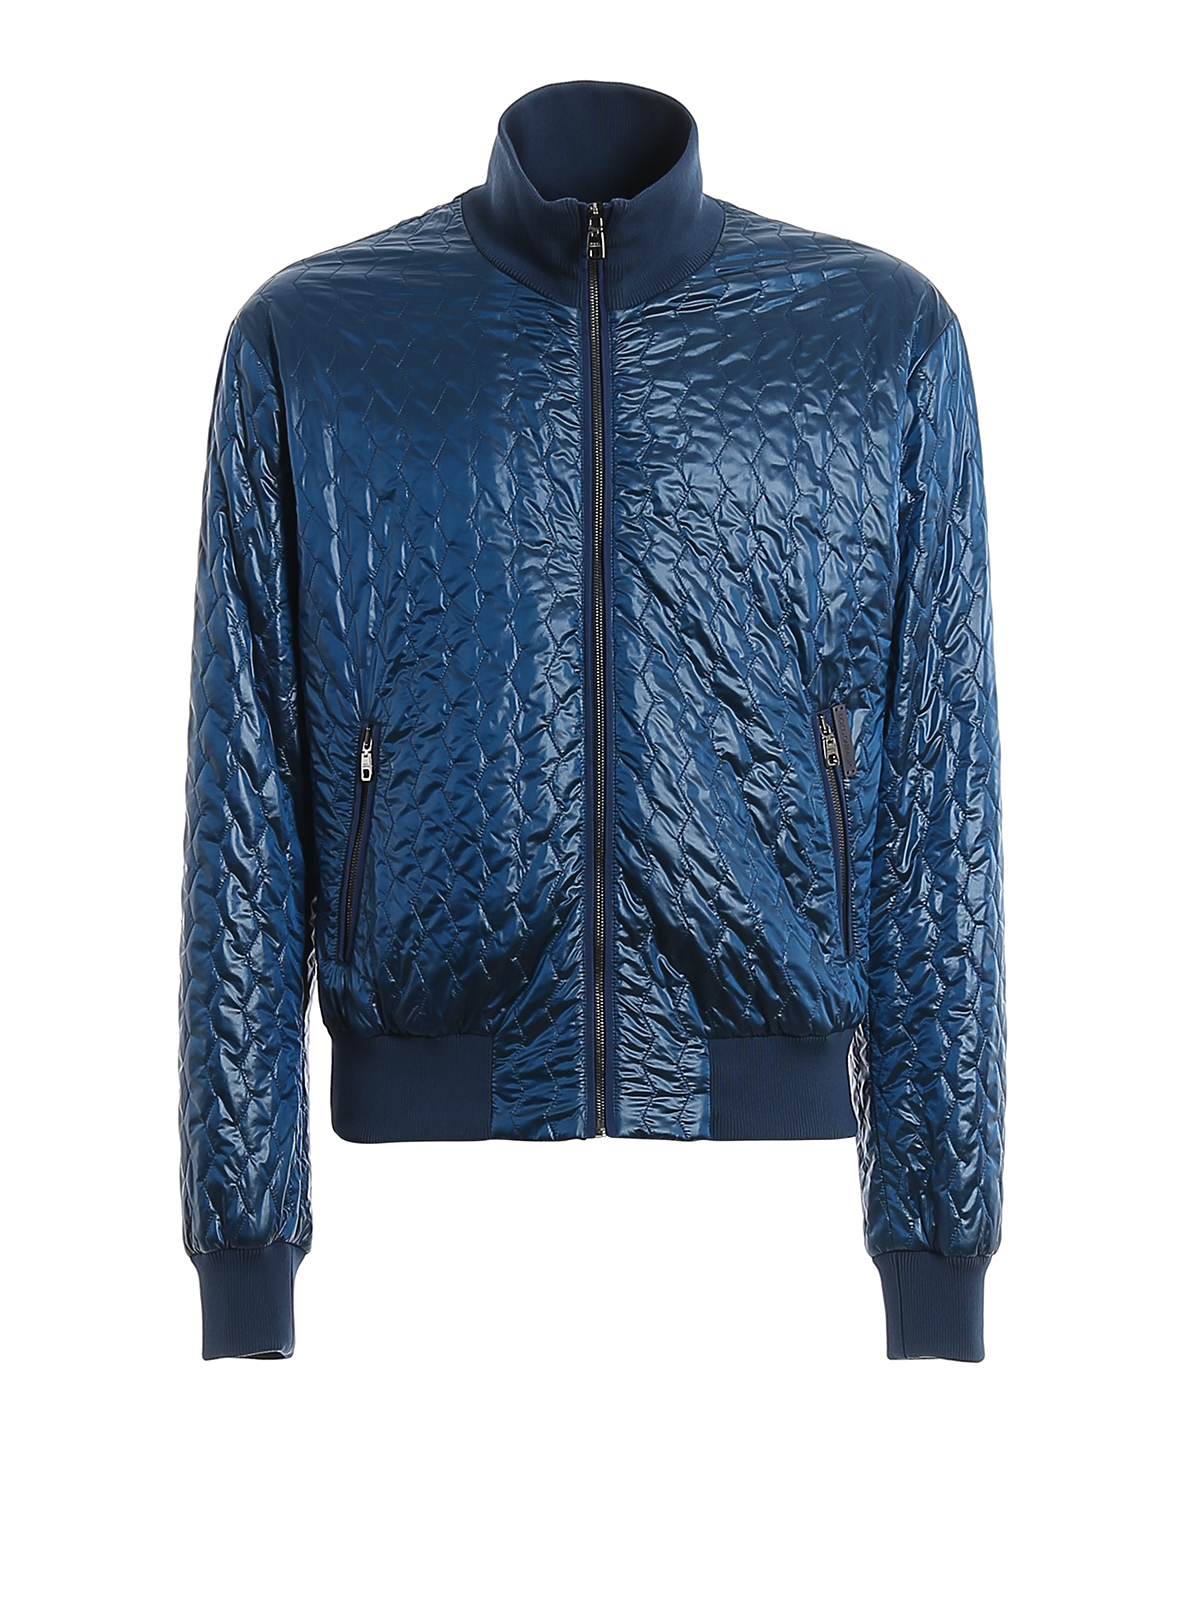 DOLCE & GABBANA PETROL BLUE QUILTED JACKET